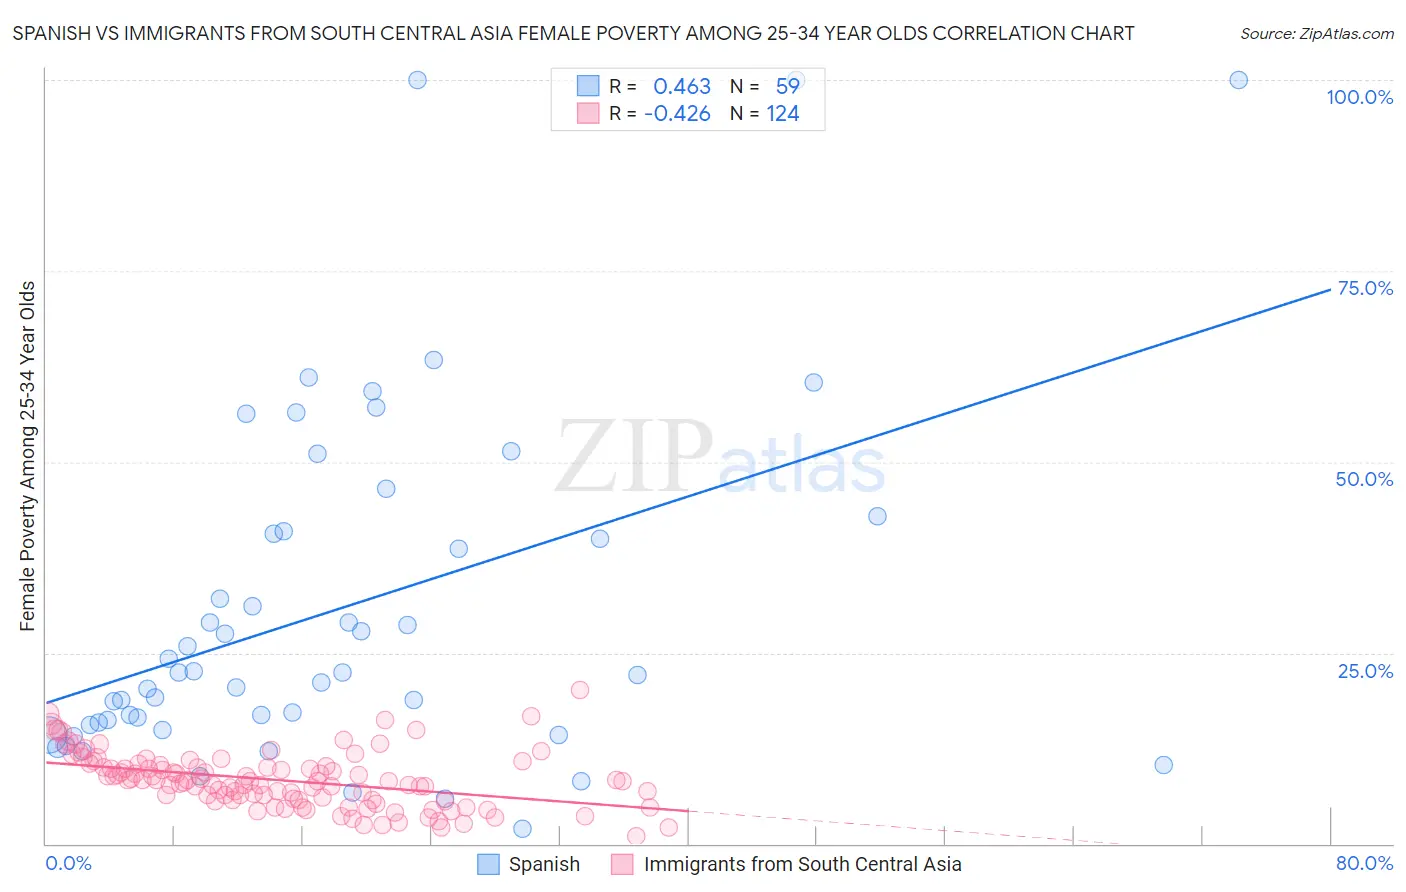 Spanish vs Immigrants from South Central Asia Female Poverty Among 25-34 Year Olds